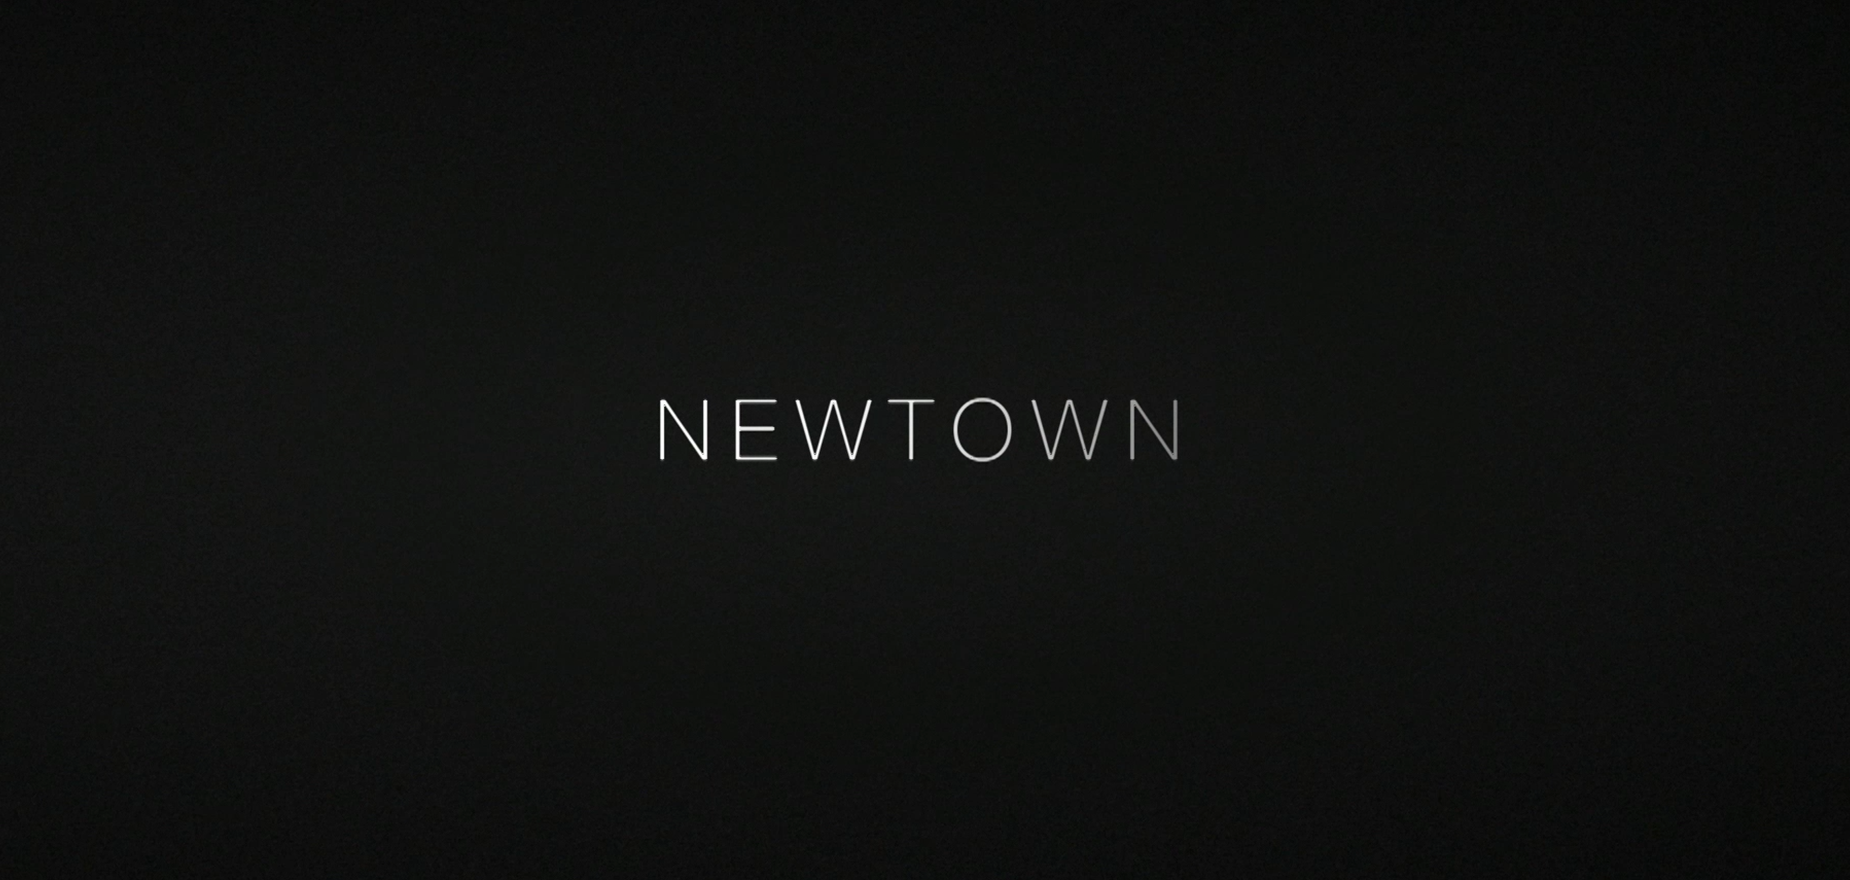 Newtown - Mile 22 LLC, Independent Television Service (ITVS), in association with KA Snyder Productions, Cuomo Cole Productions